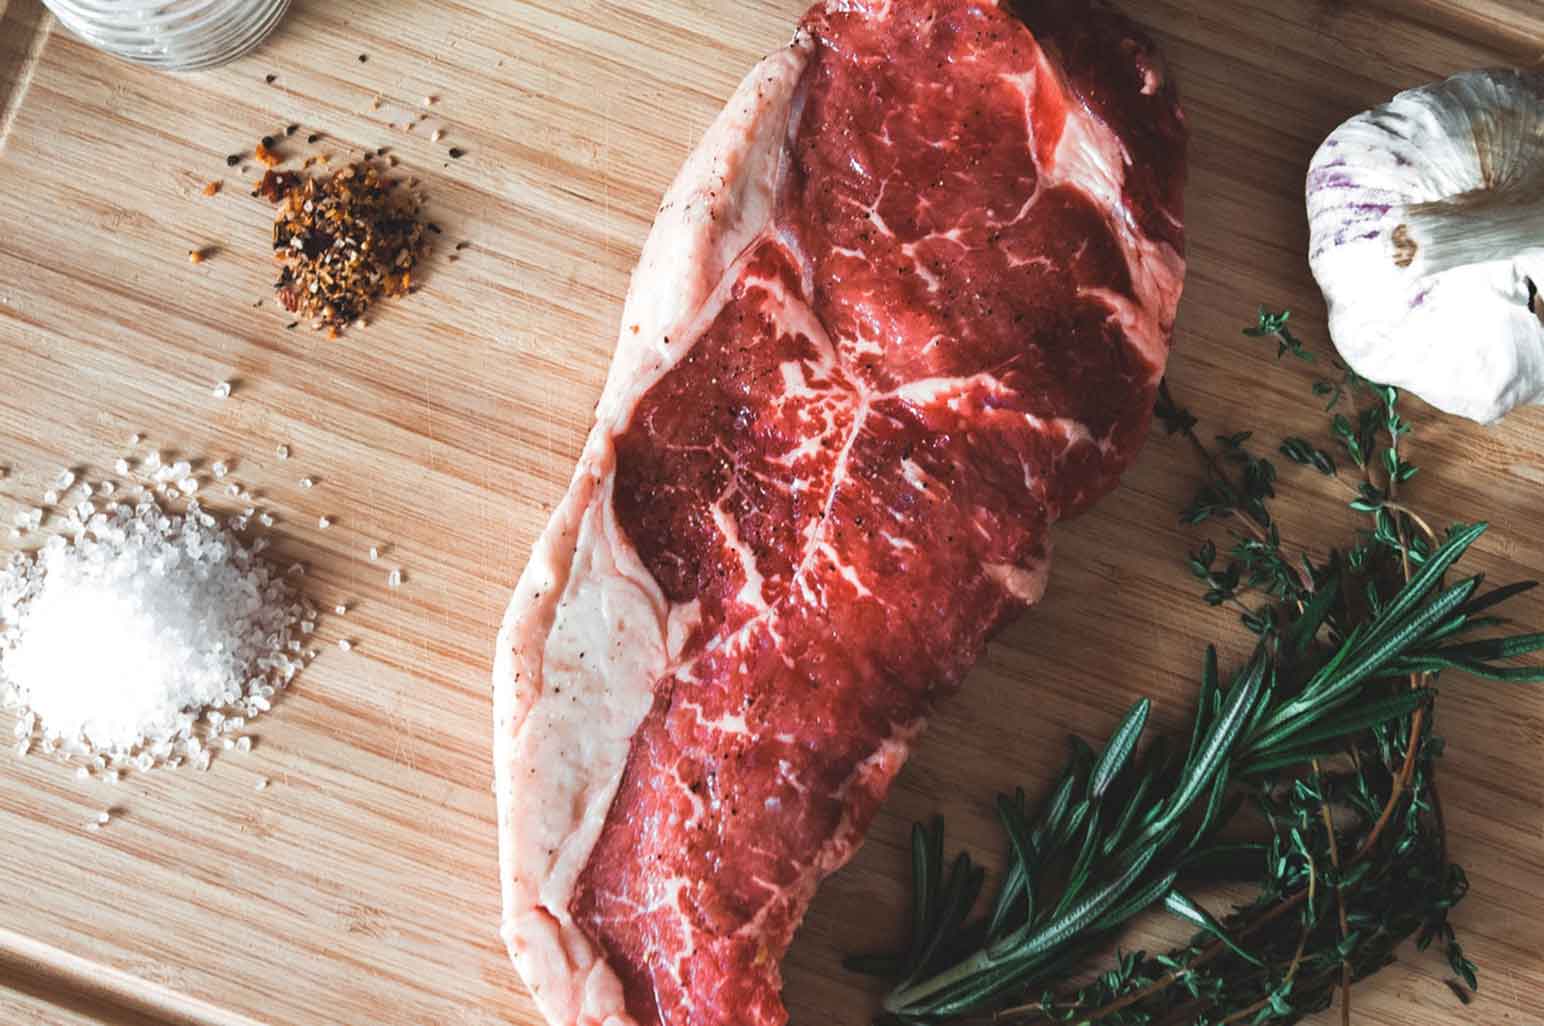 Is Red Meat Healthy or Not